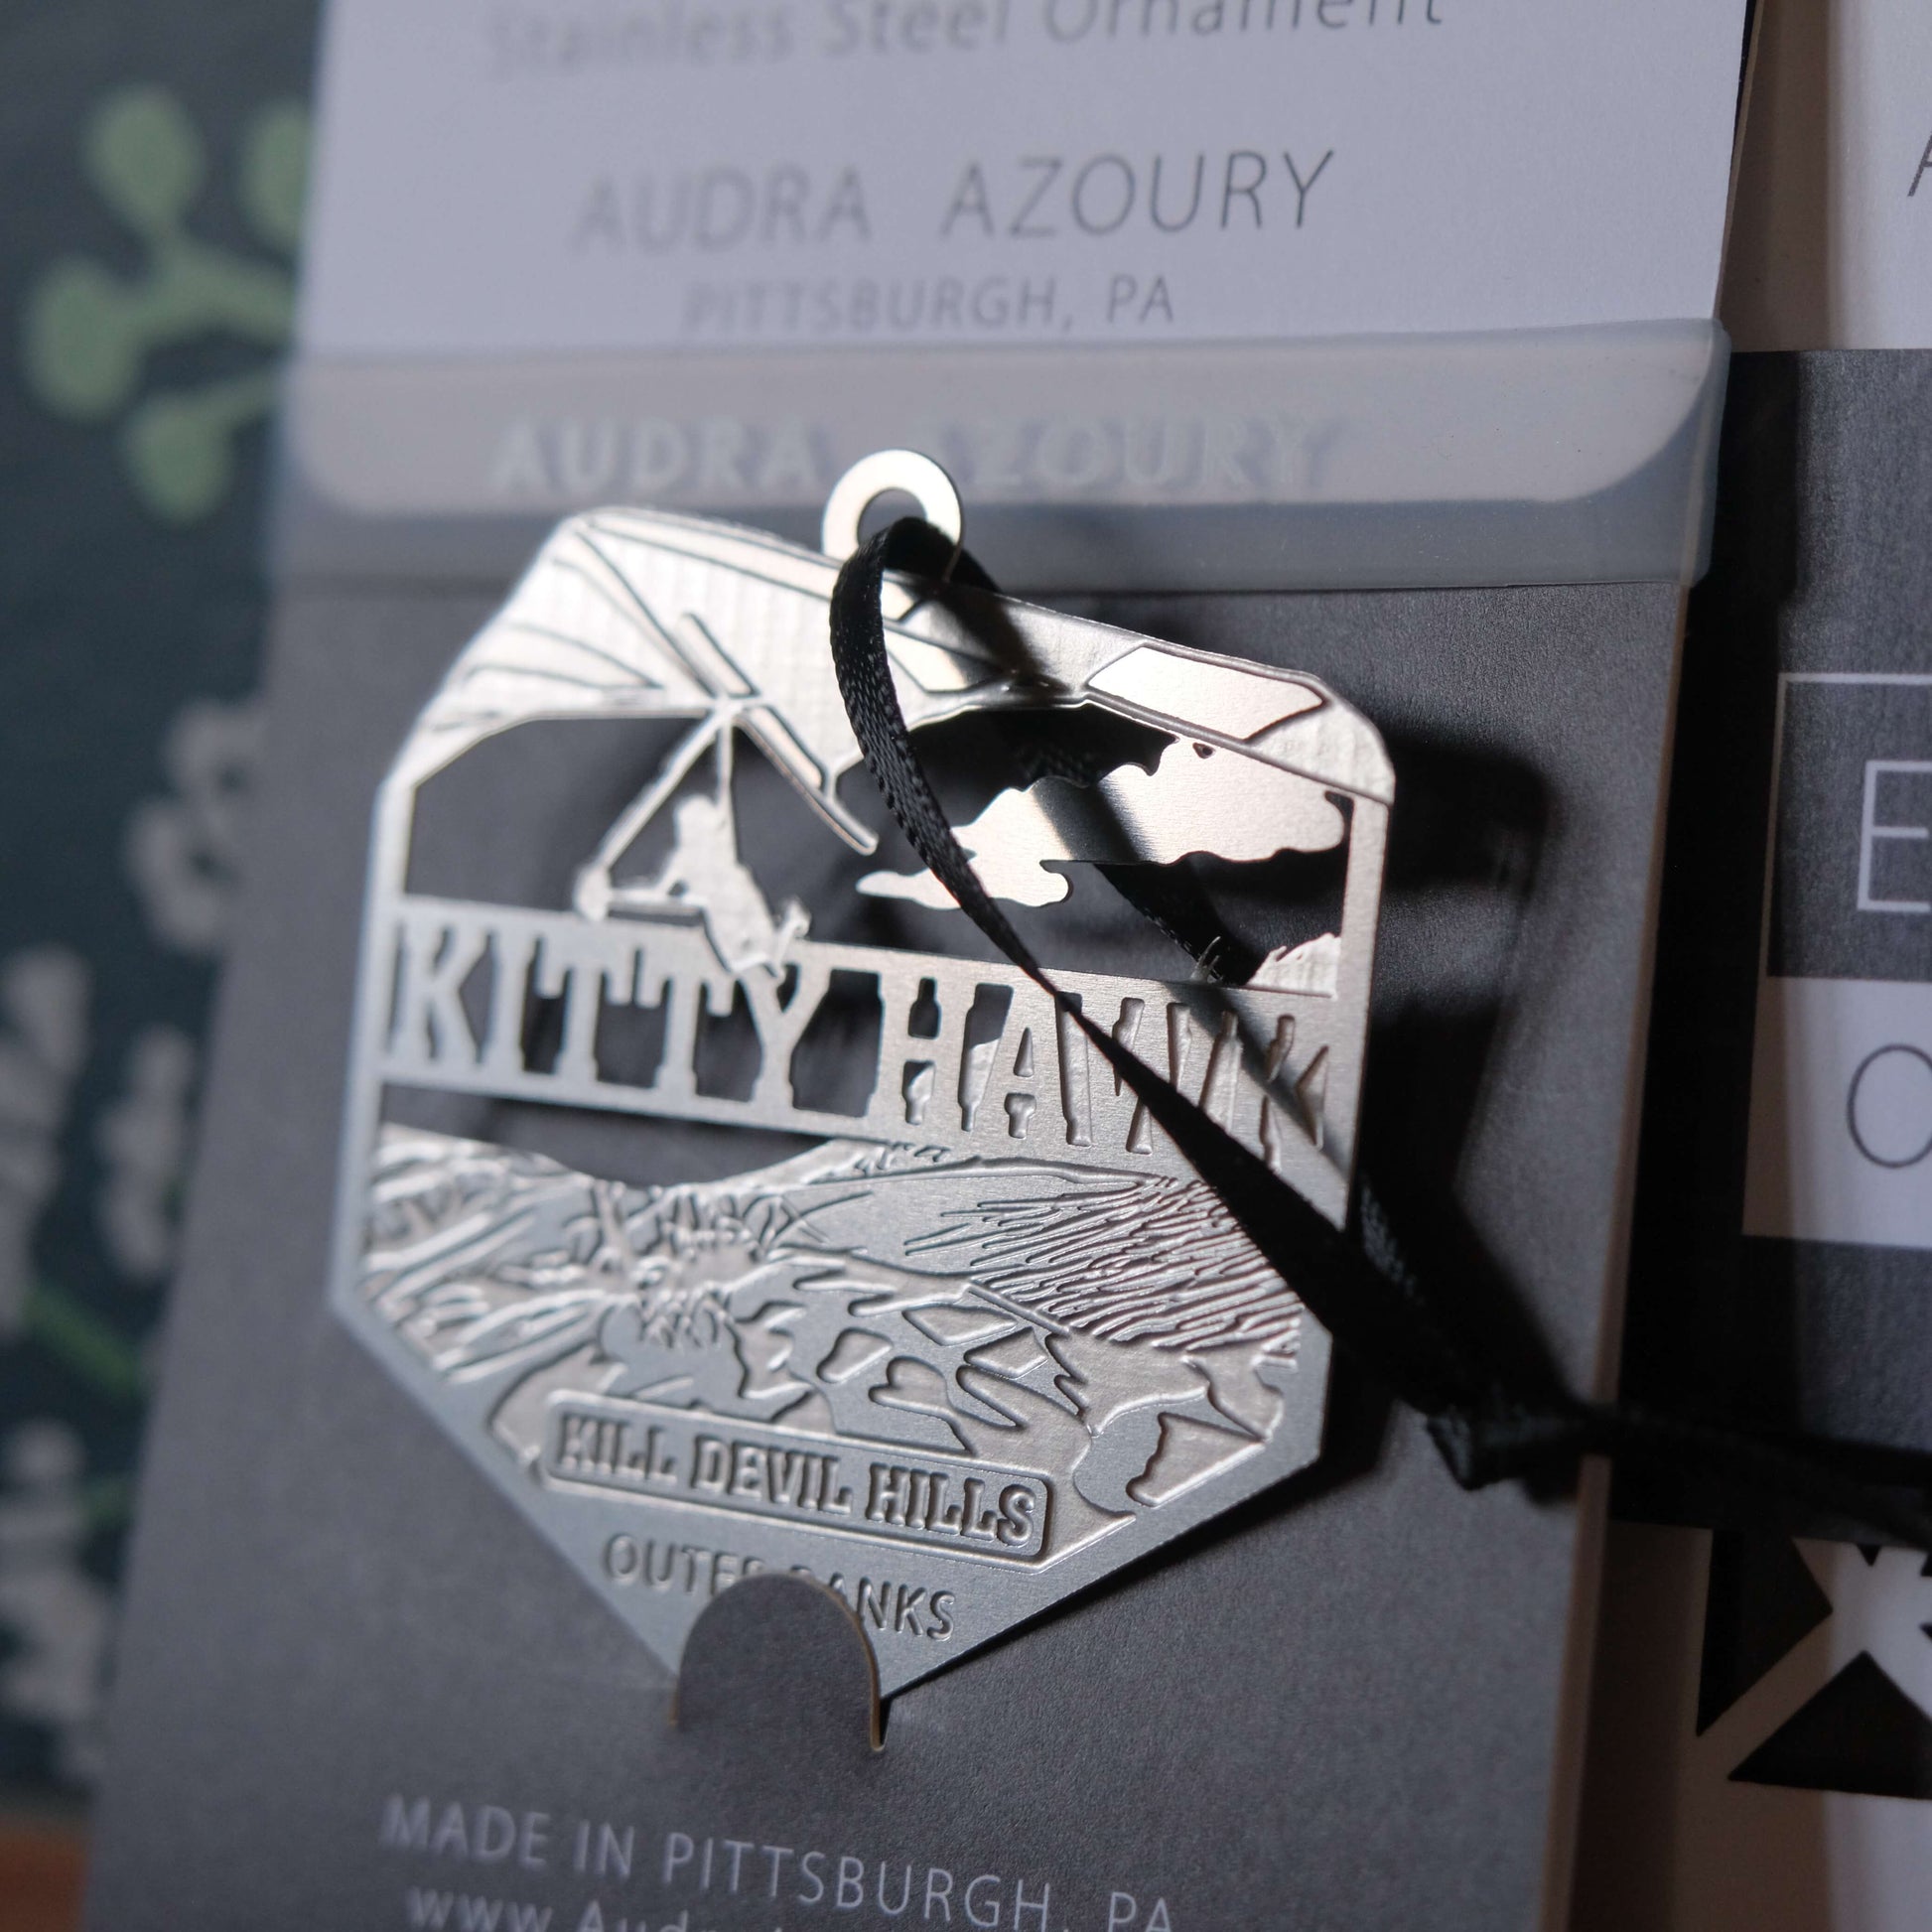 Kitty Hawk Stainless Steel Ornament by Audra Azoury